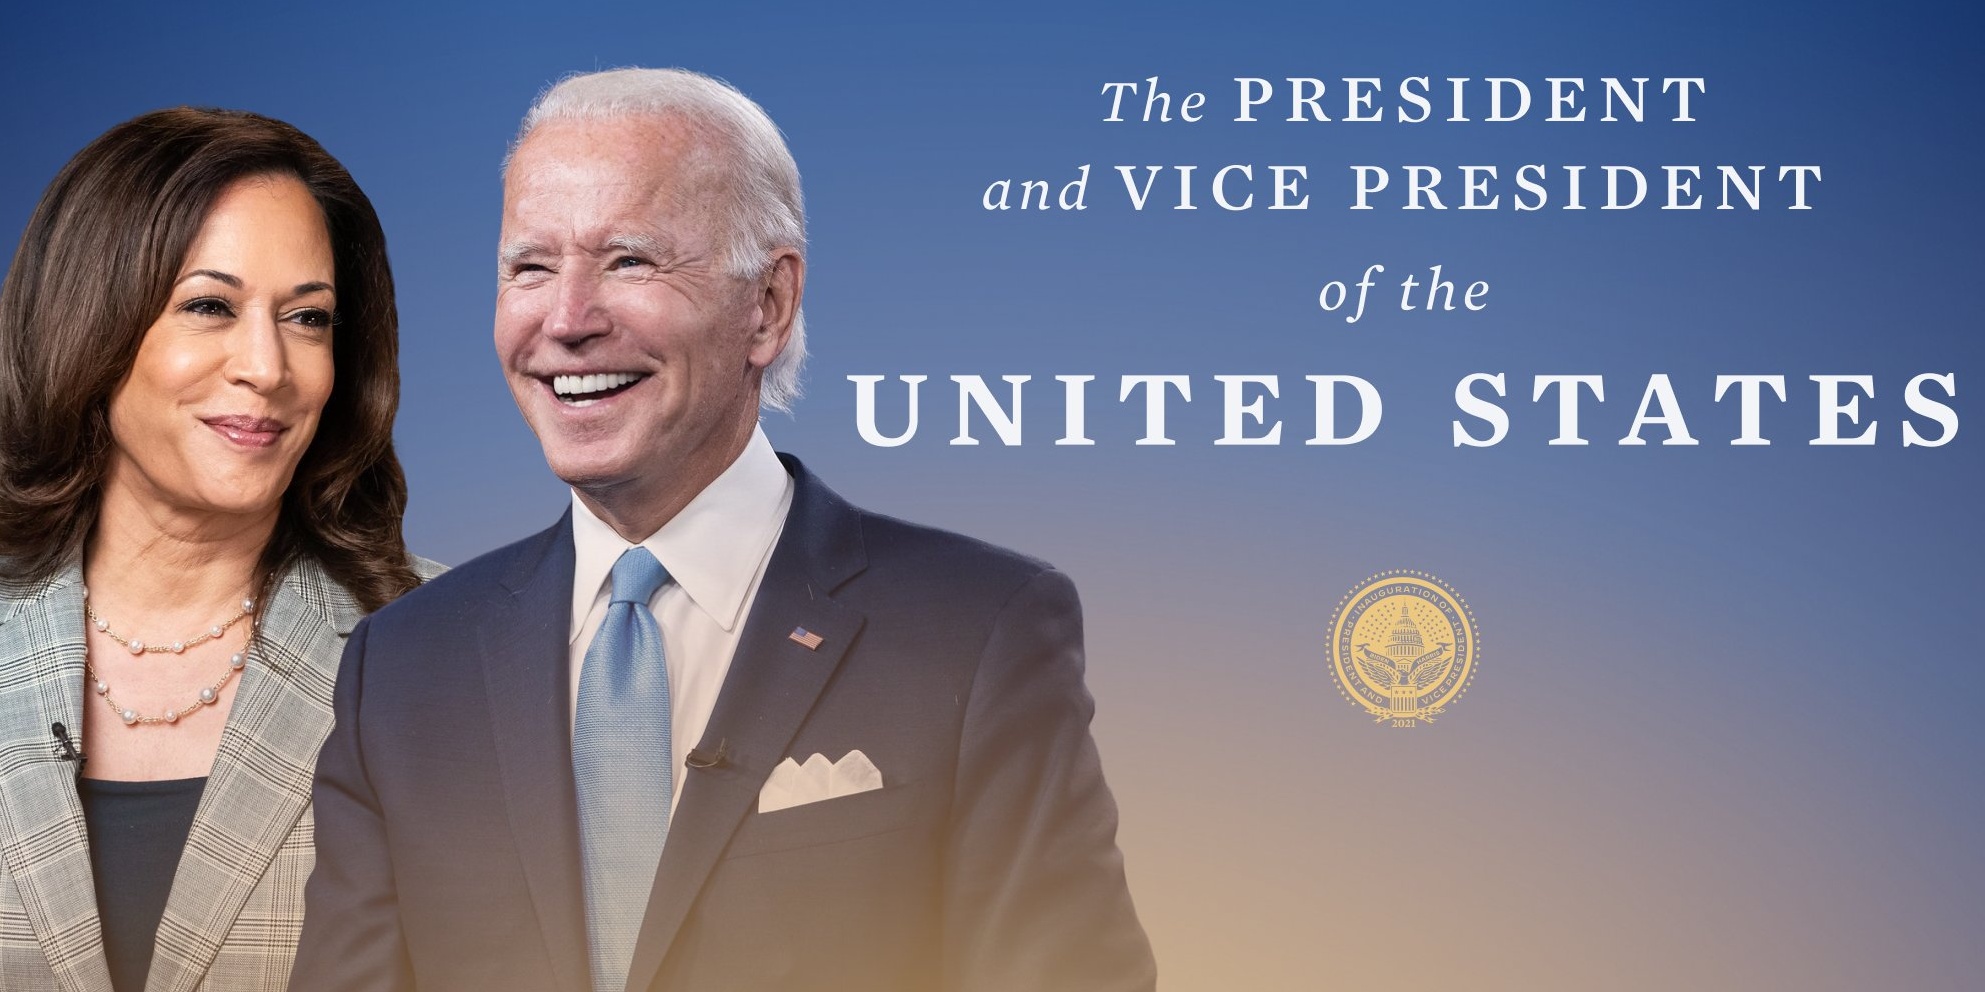 image depicting Joe Biden is officially the new President of the United States